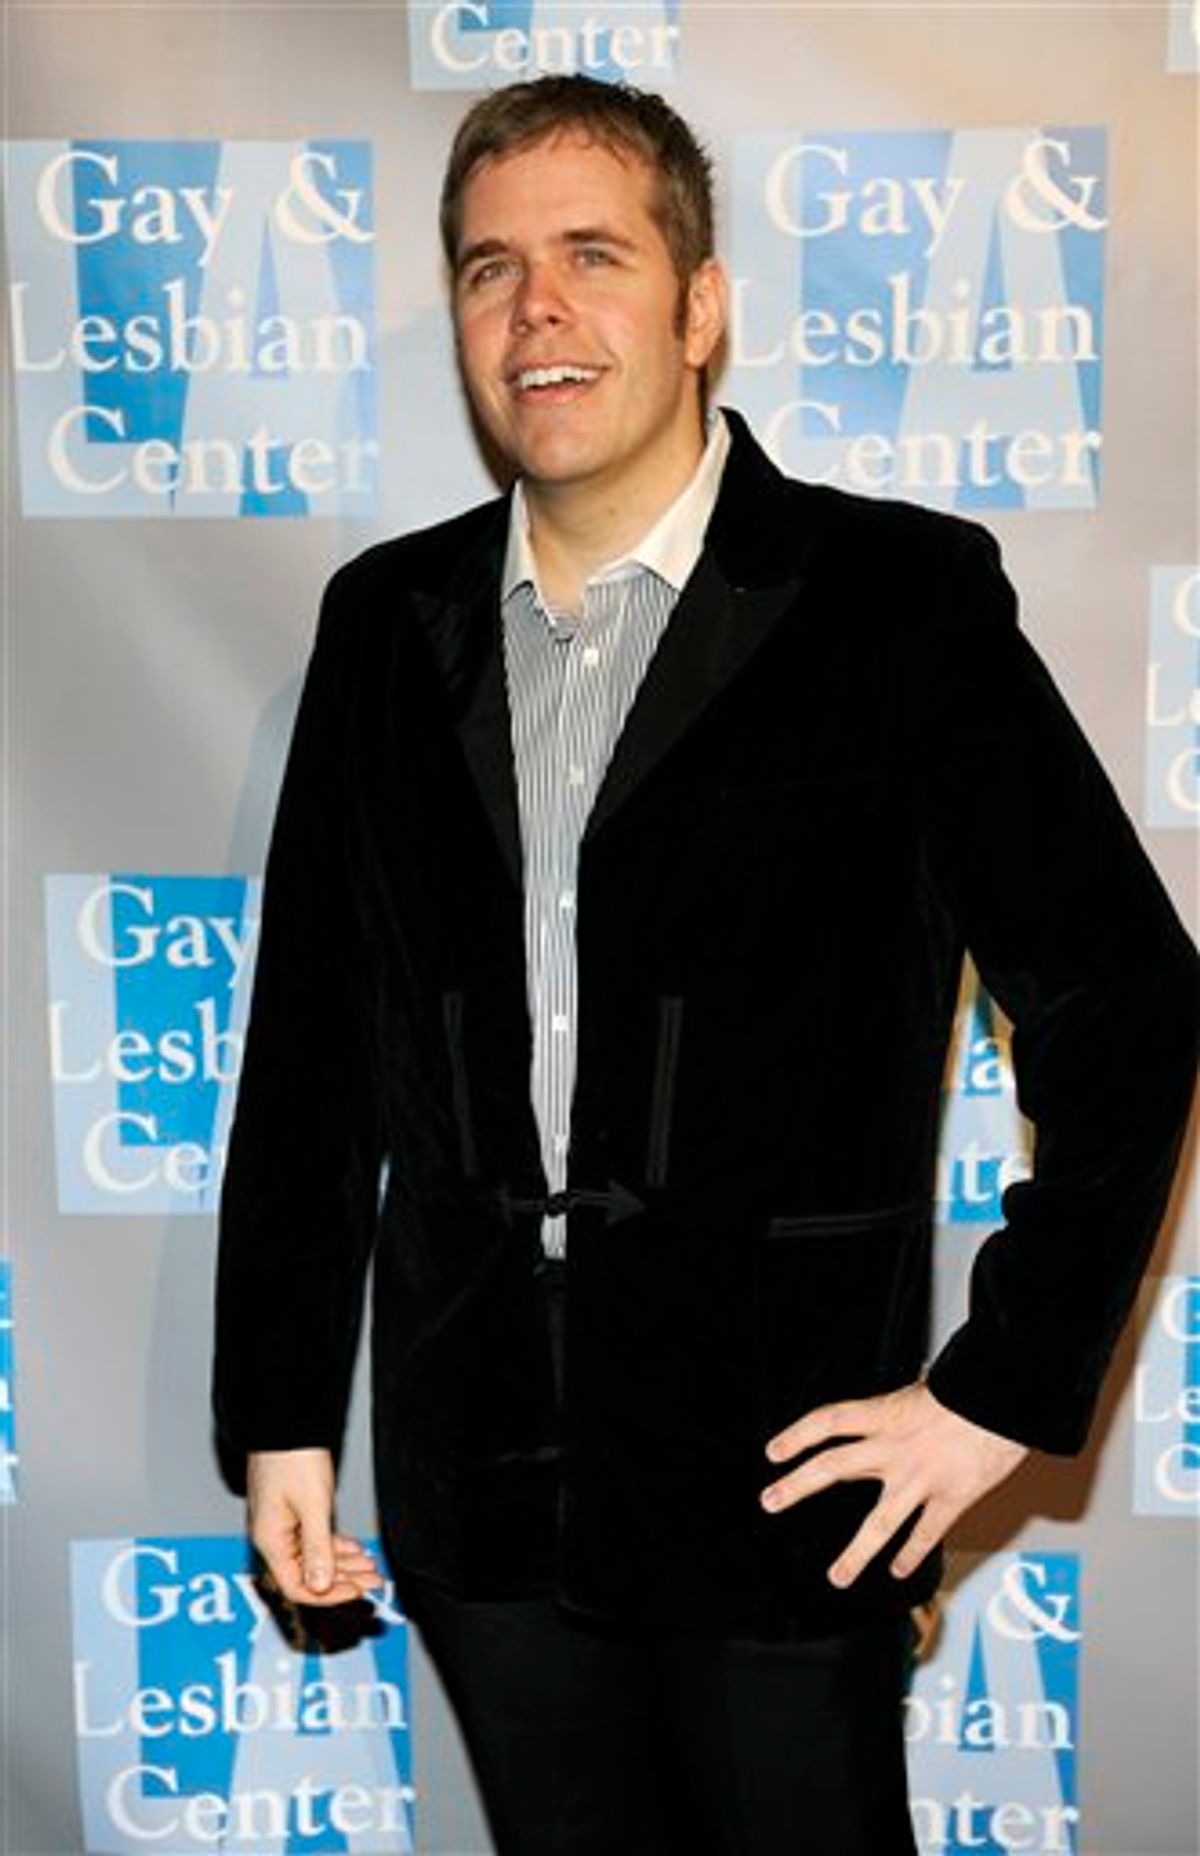 FILE - In this April 24, 2009 file photo, Perez Hilton arrives at the Los Angeles Gay and Lesbian Center's "An Evening with Women: Celebrating Art, Music and Equality," in Beverly Hills, Calif. (AP Photo/Chris Pizzello, file) (AP)